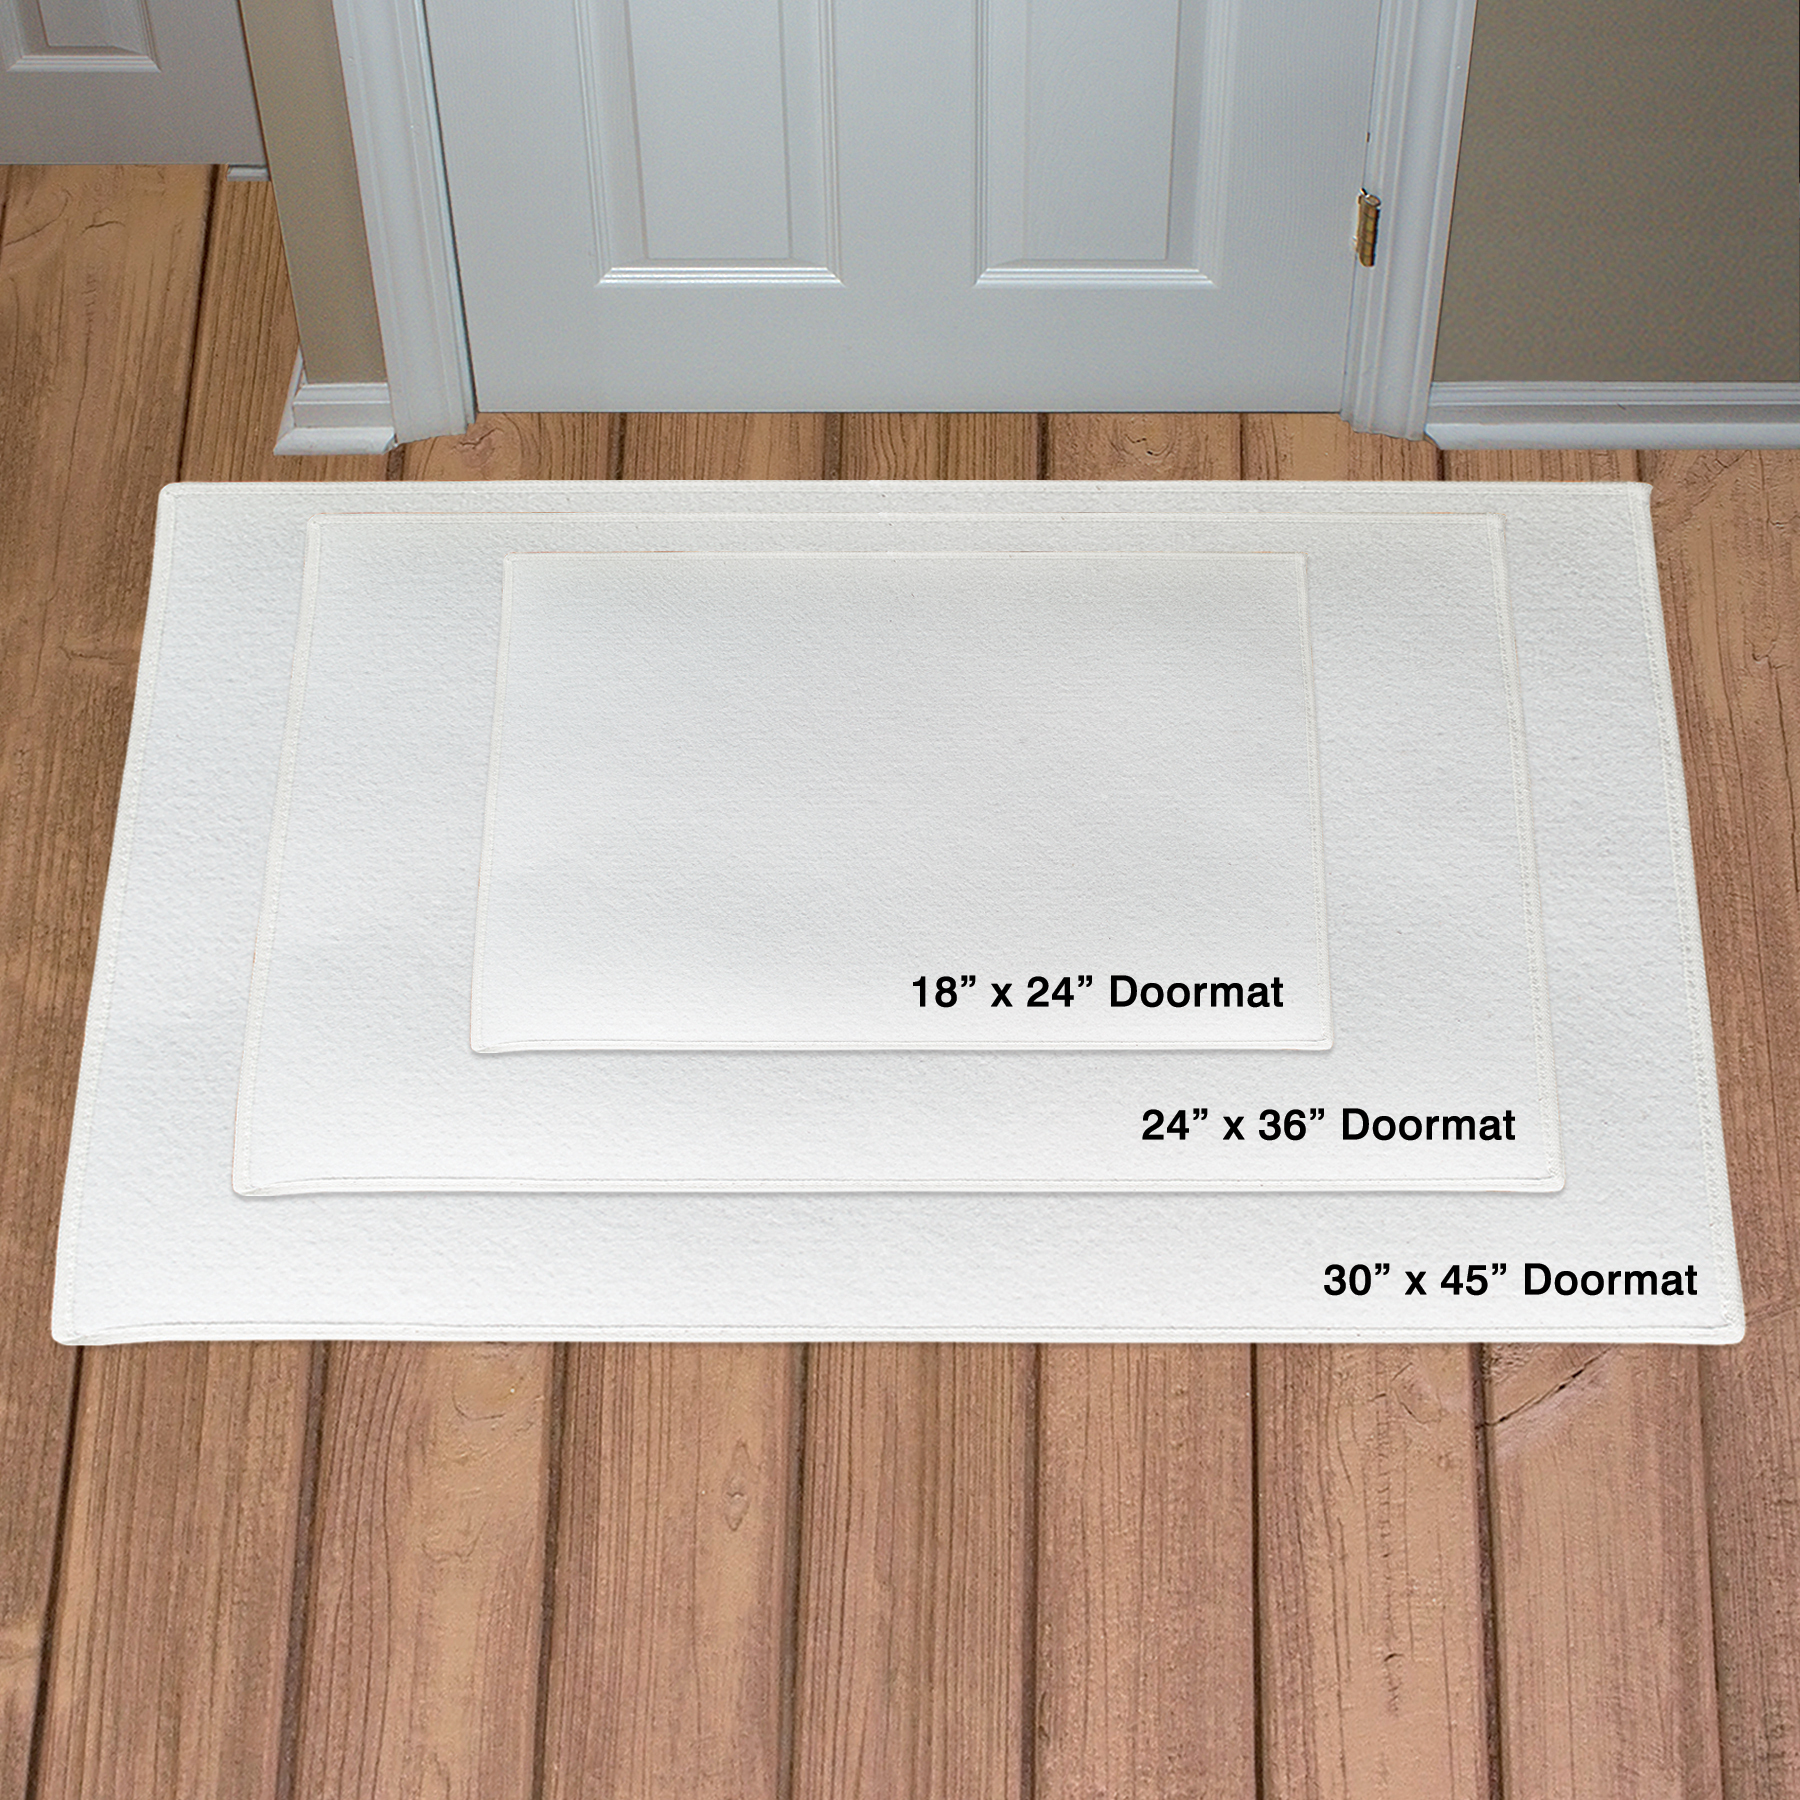 https://www.giftsforyounow.com/images/products/doormat-3-sizes.jpg